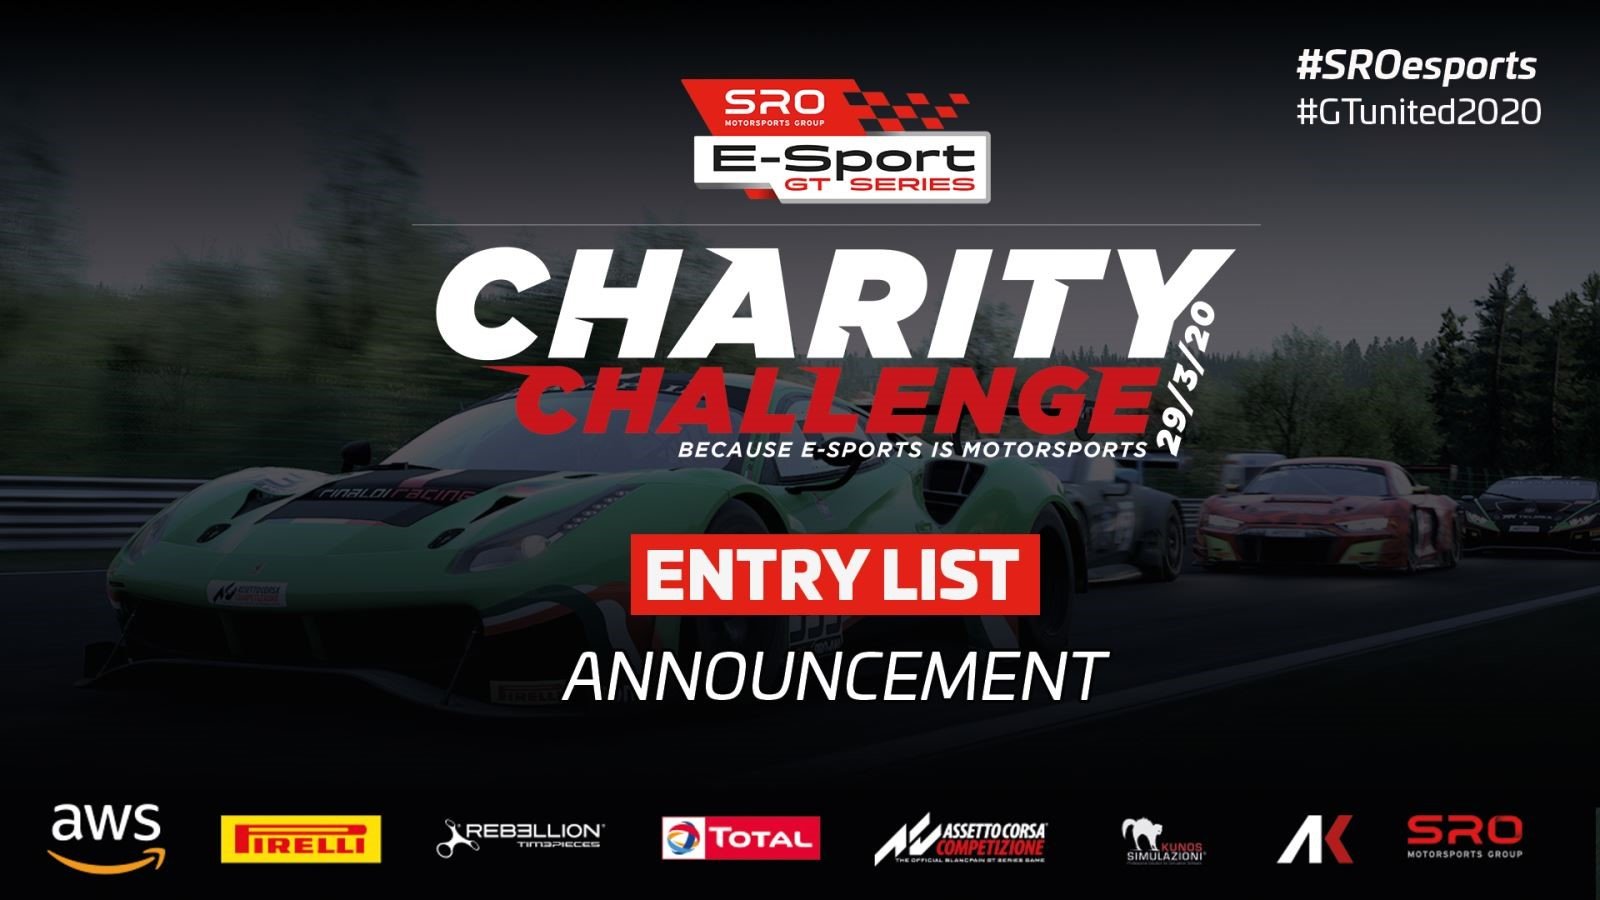 Virtual GT racing takes centre stage at Monza for SRO E-Sport GT Series Charity Challenge 